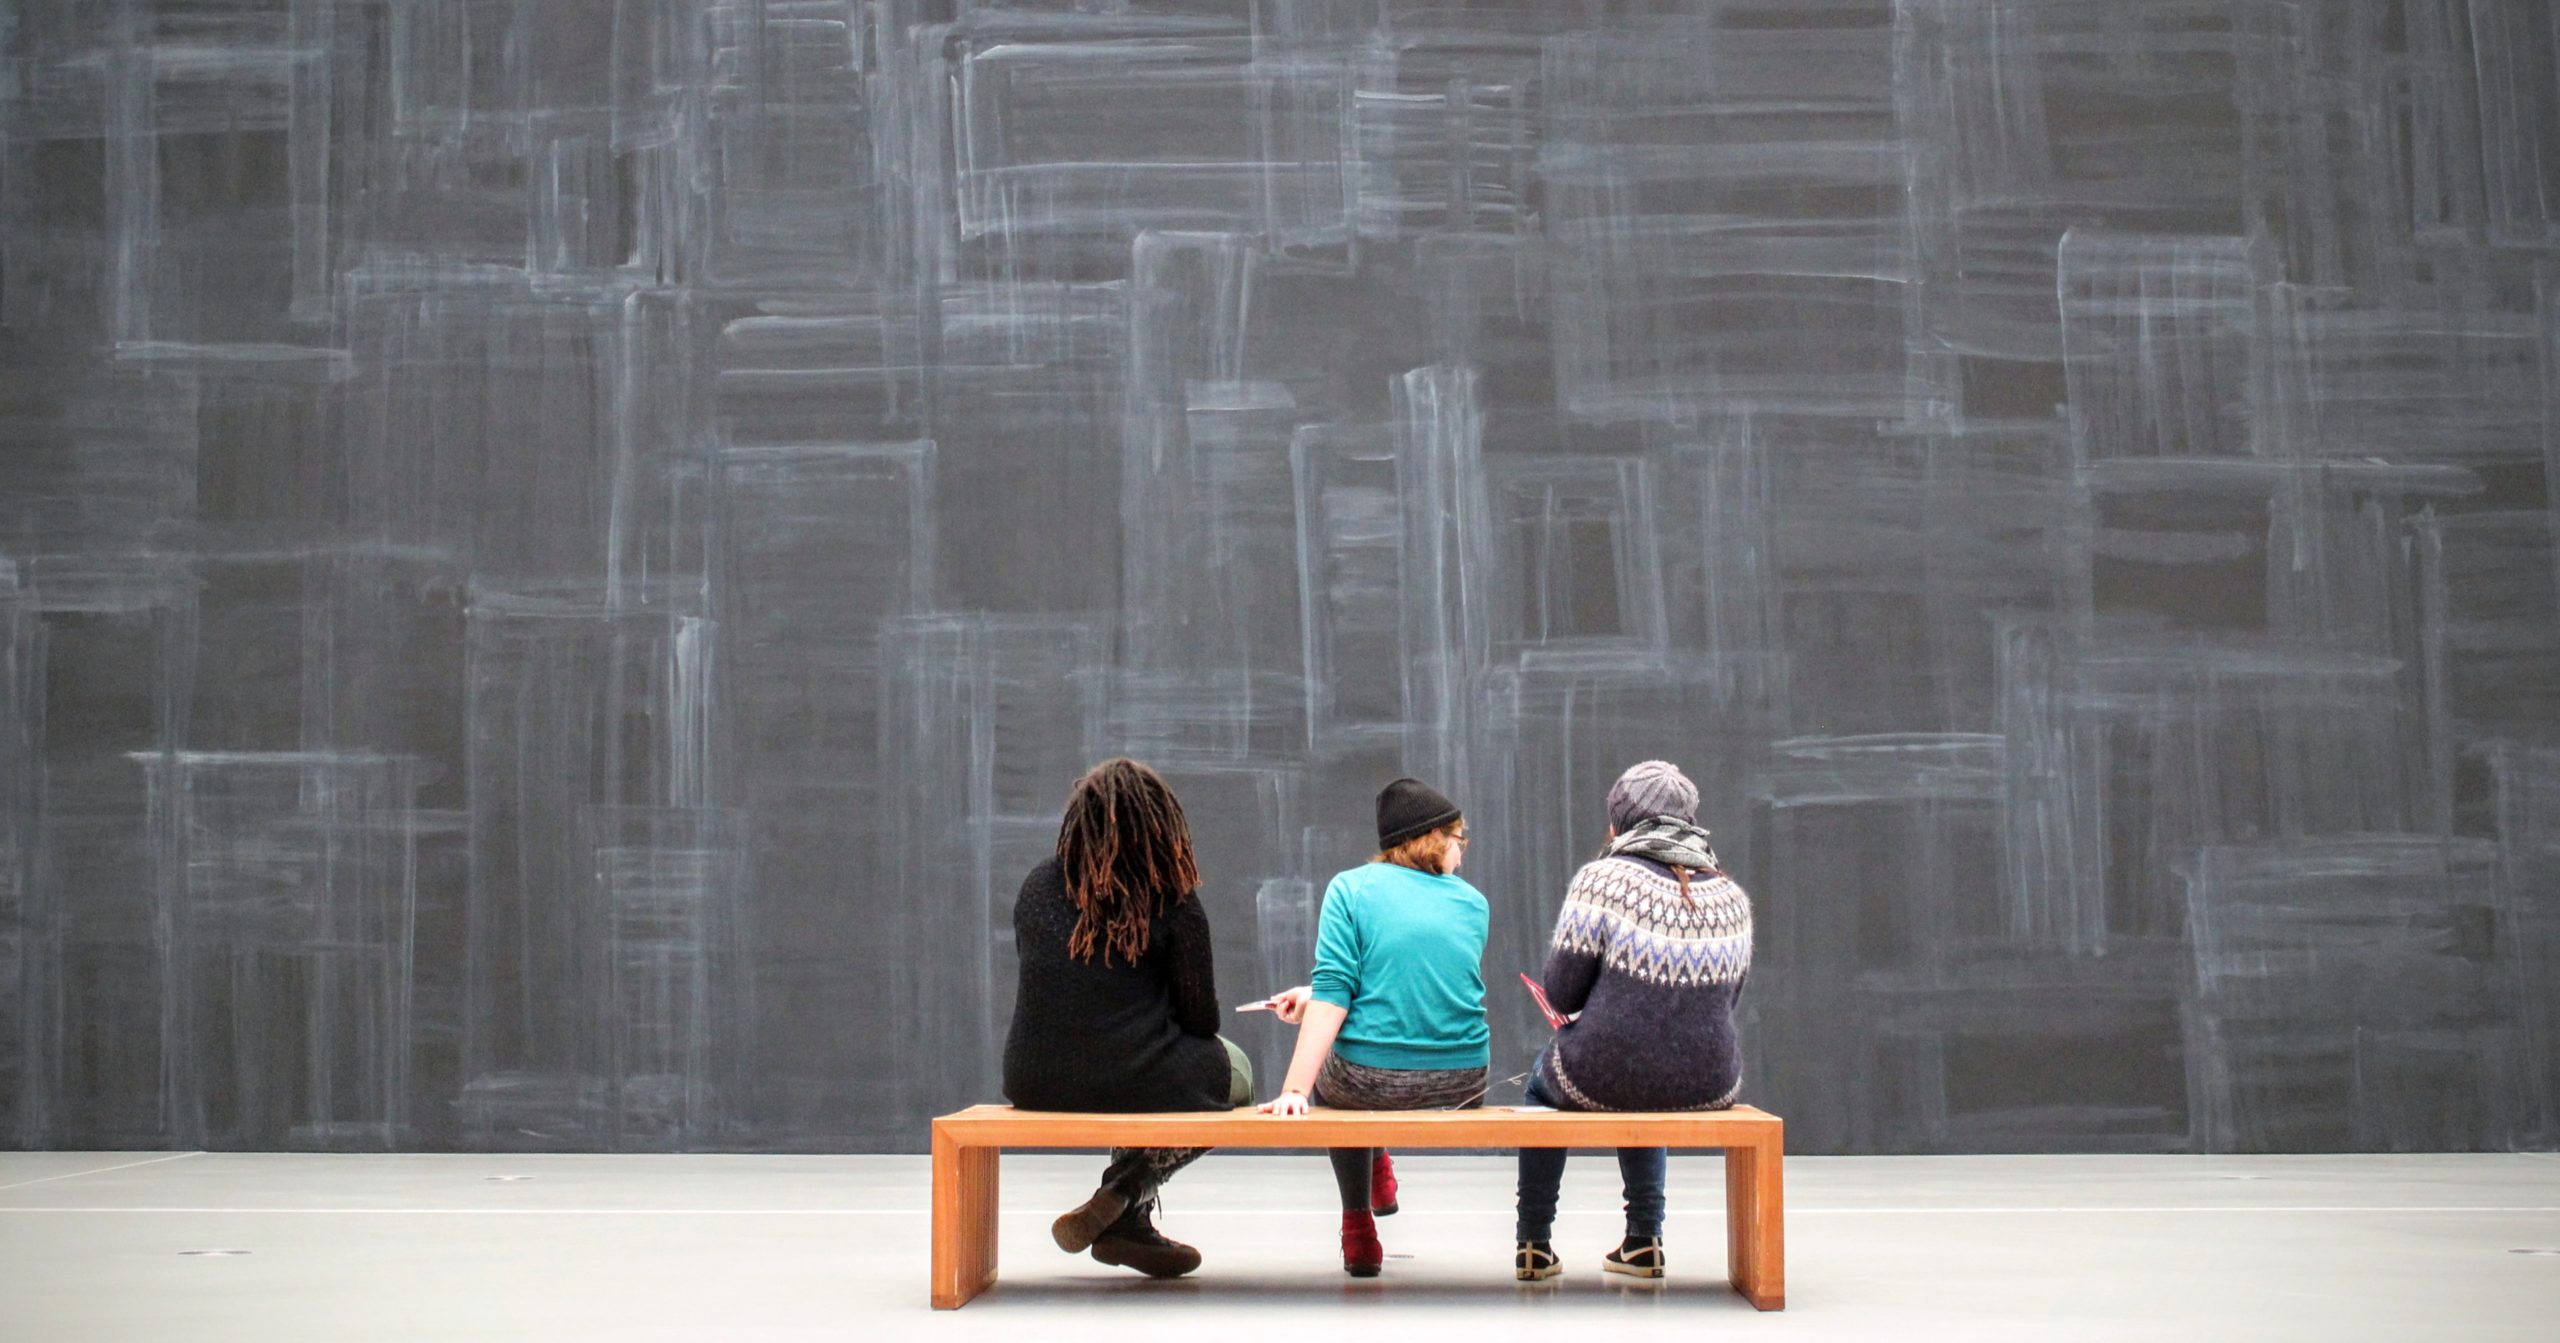 Three people site with their backs to the camera, looking at an art installation